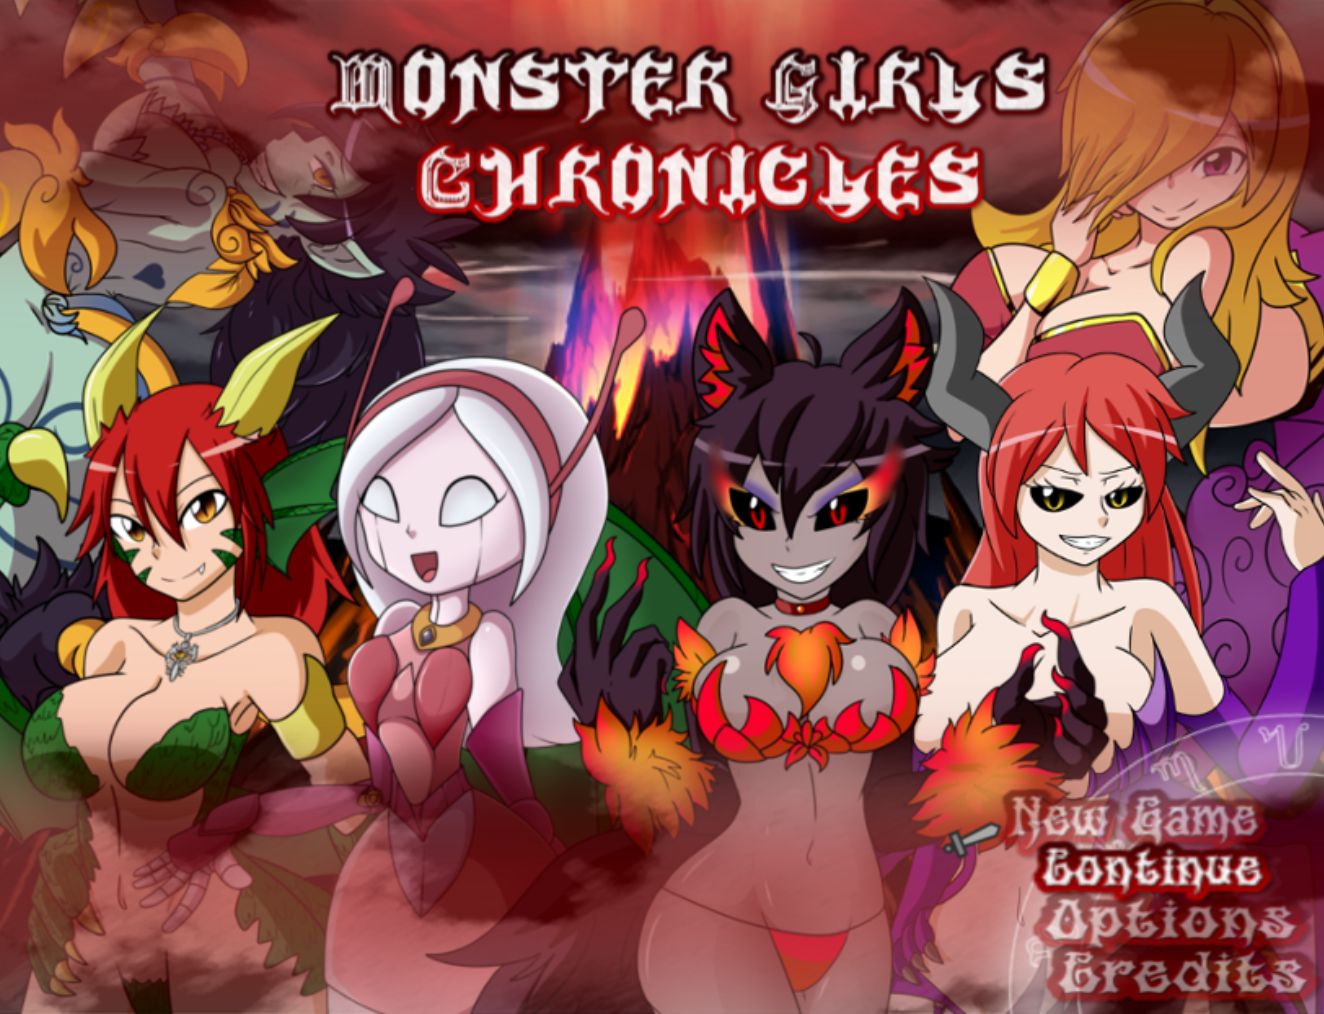 Monster Girls Chronicles v0.3 Demo - free game download, reviews ...